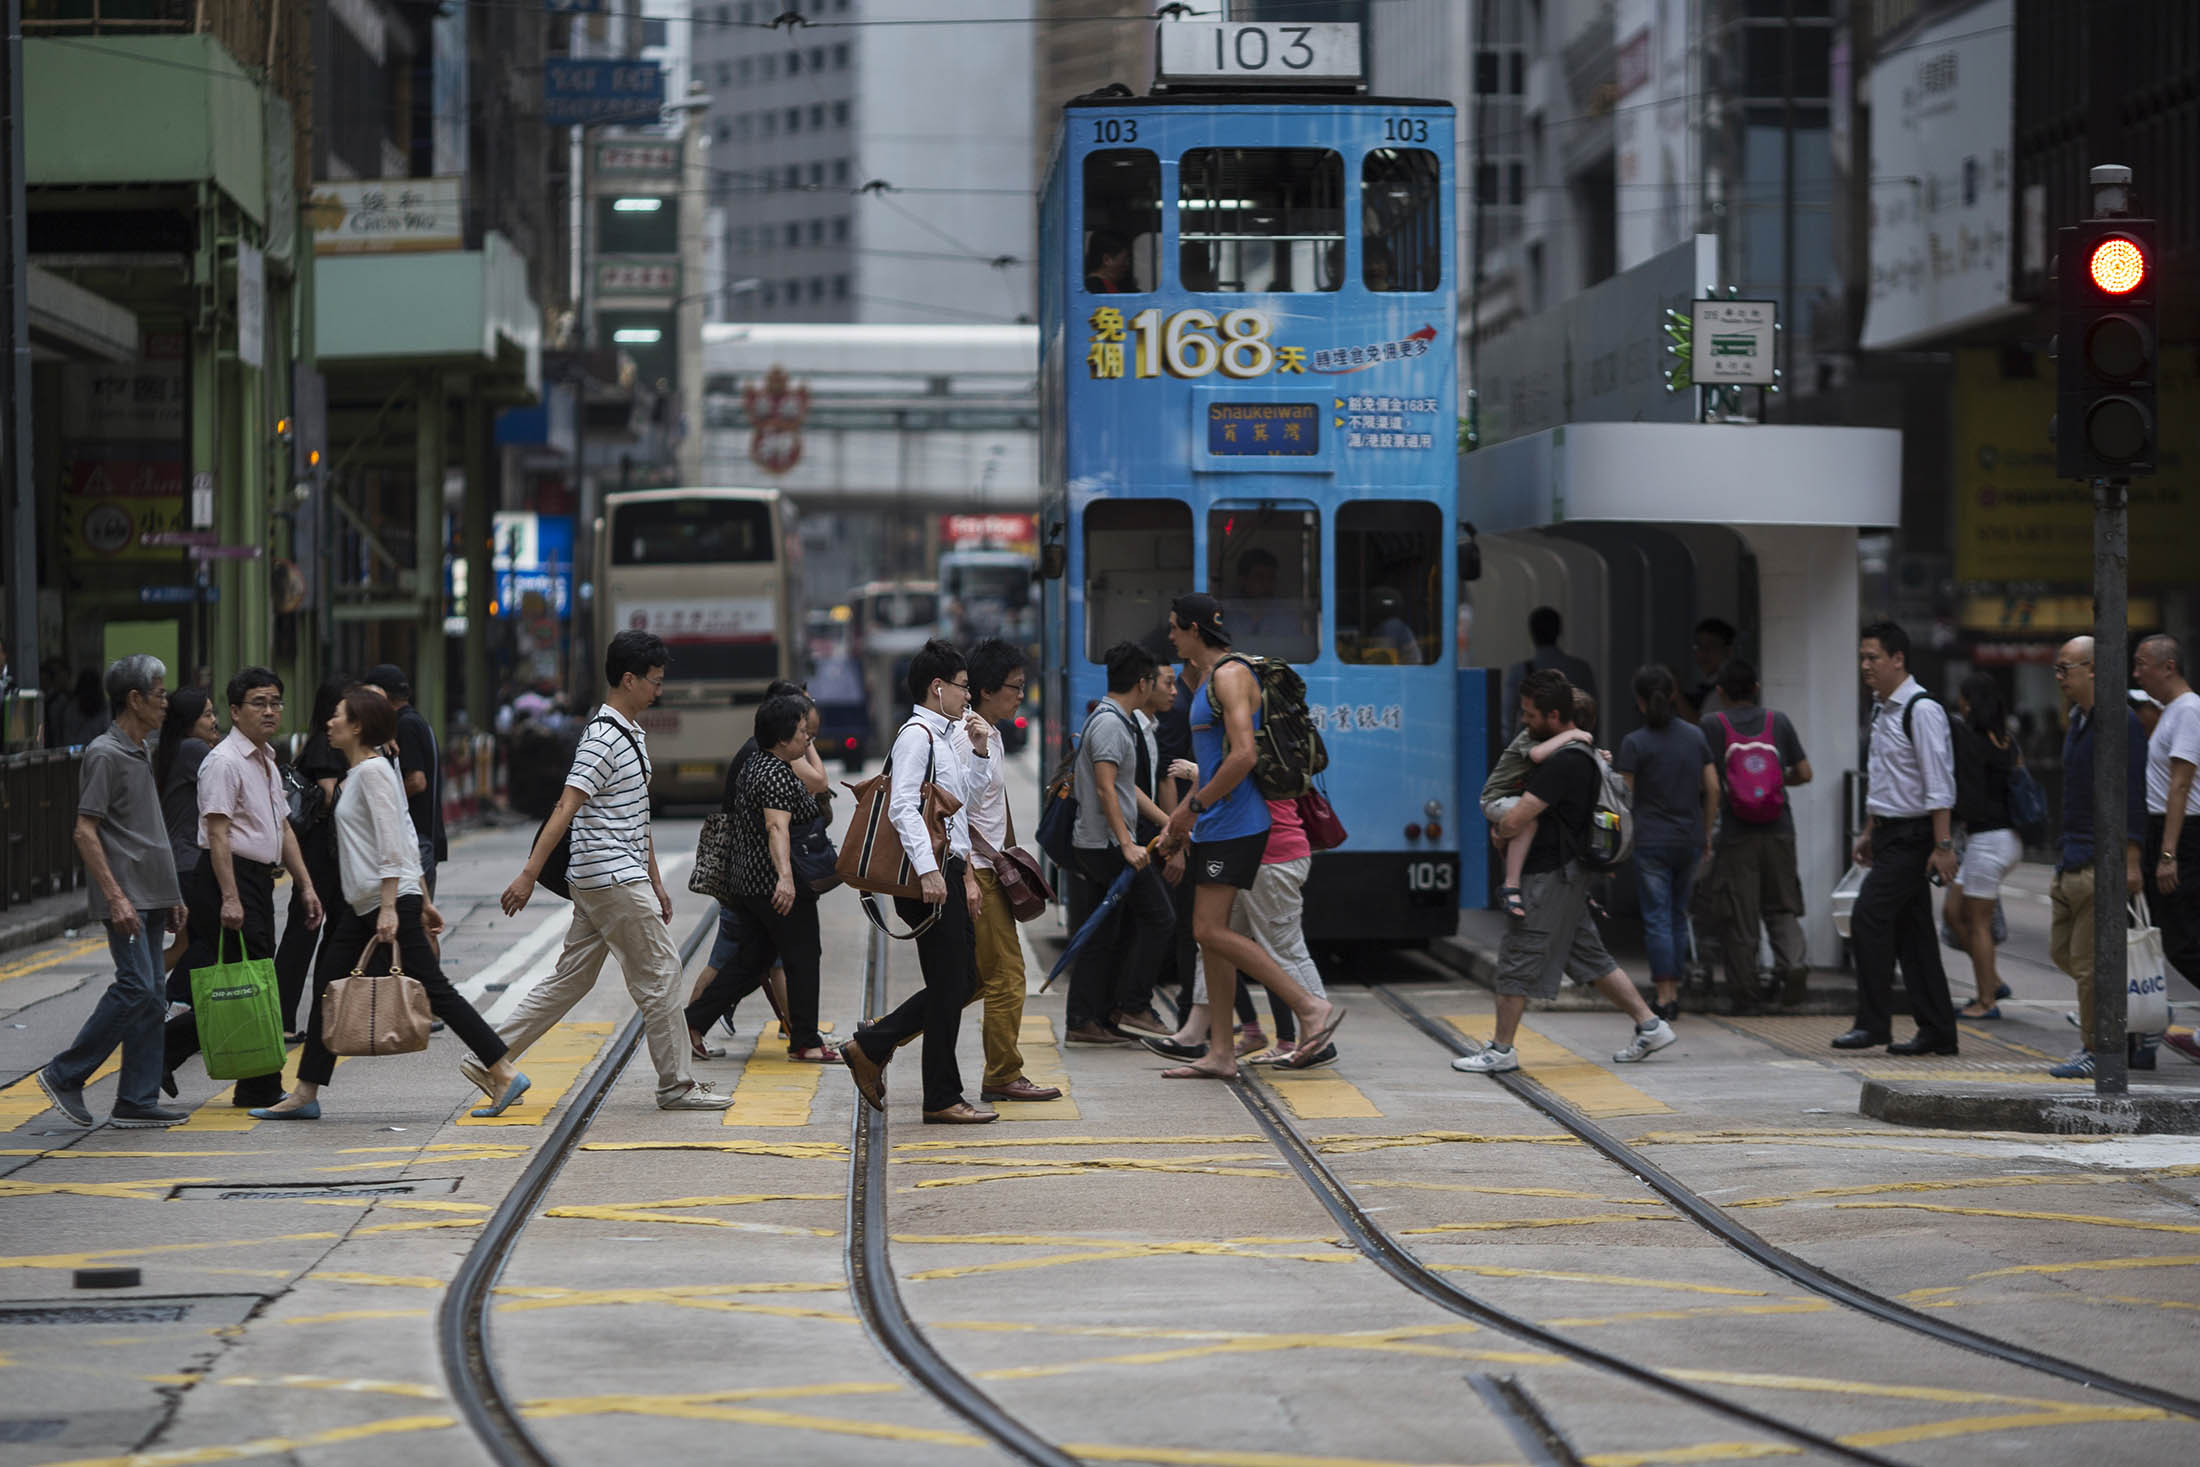 Pedestrians cross a road in front of a tram in the central business district of Hong Kong, China, on Thursday, July 9, 2015. After tumbling the most since the financial crisis on July 8 amid a record surge in volatility, the Hang Seng Index rebounded Thursday to its biggest gain in three months.
